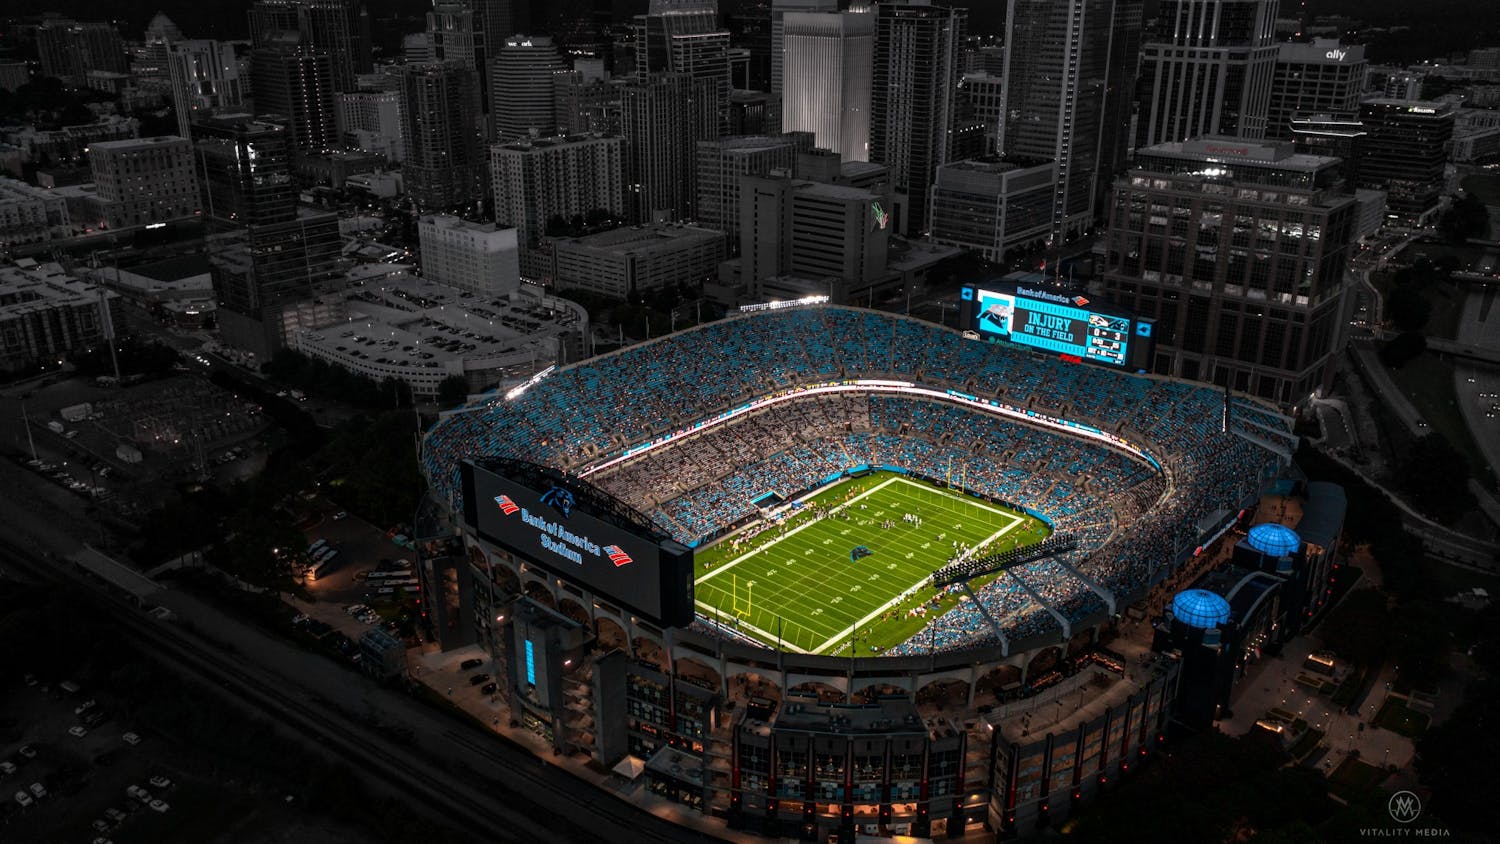 The Bank of America Stadium located in Charlotte, North Carolina, is home to the Carolina Panthers.&nbsp;